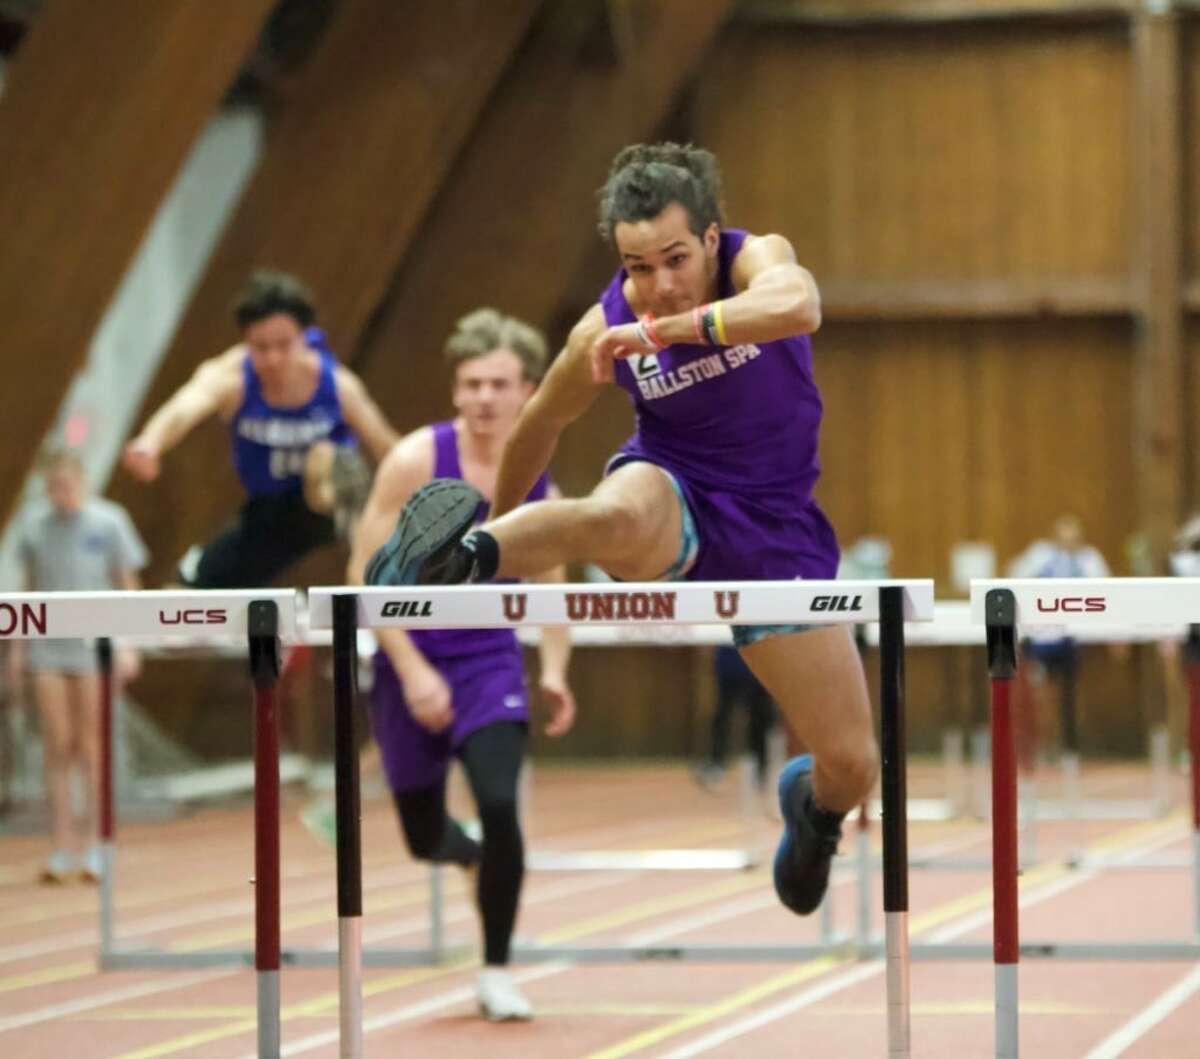 Ballston Spa's Isaiah Hannah won two individual titles at the Division II sectional meet, taking the 45-meter dash and the 50-meter hurdles. He was also on a second-place 800 relay.